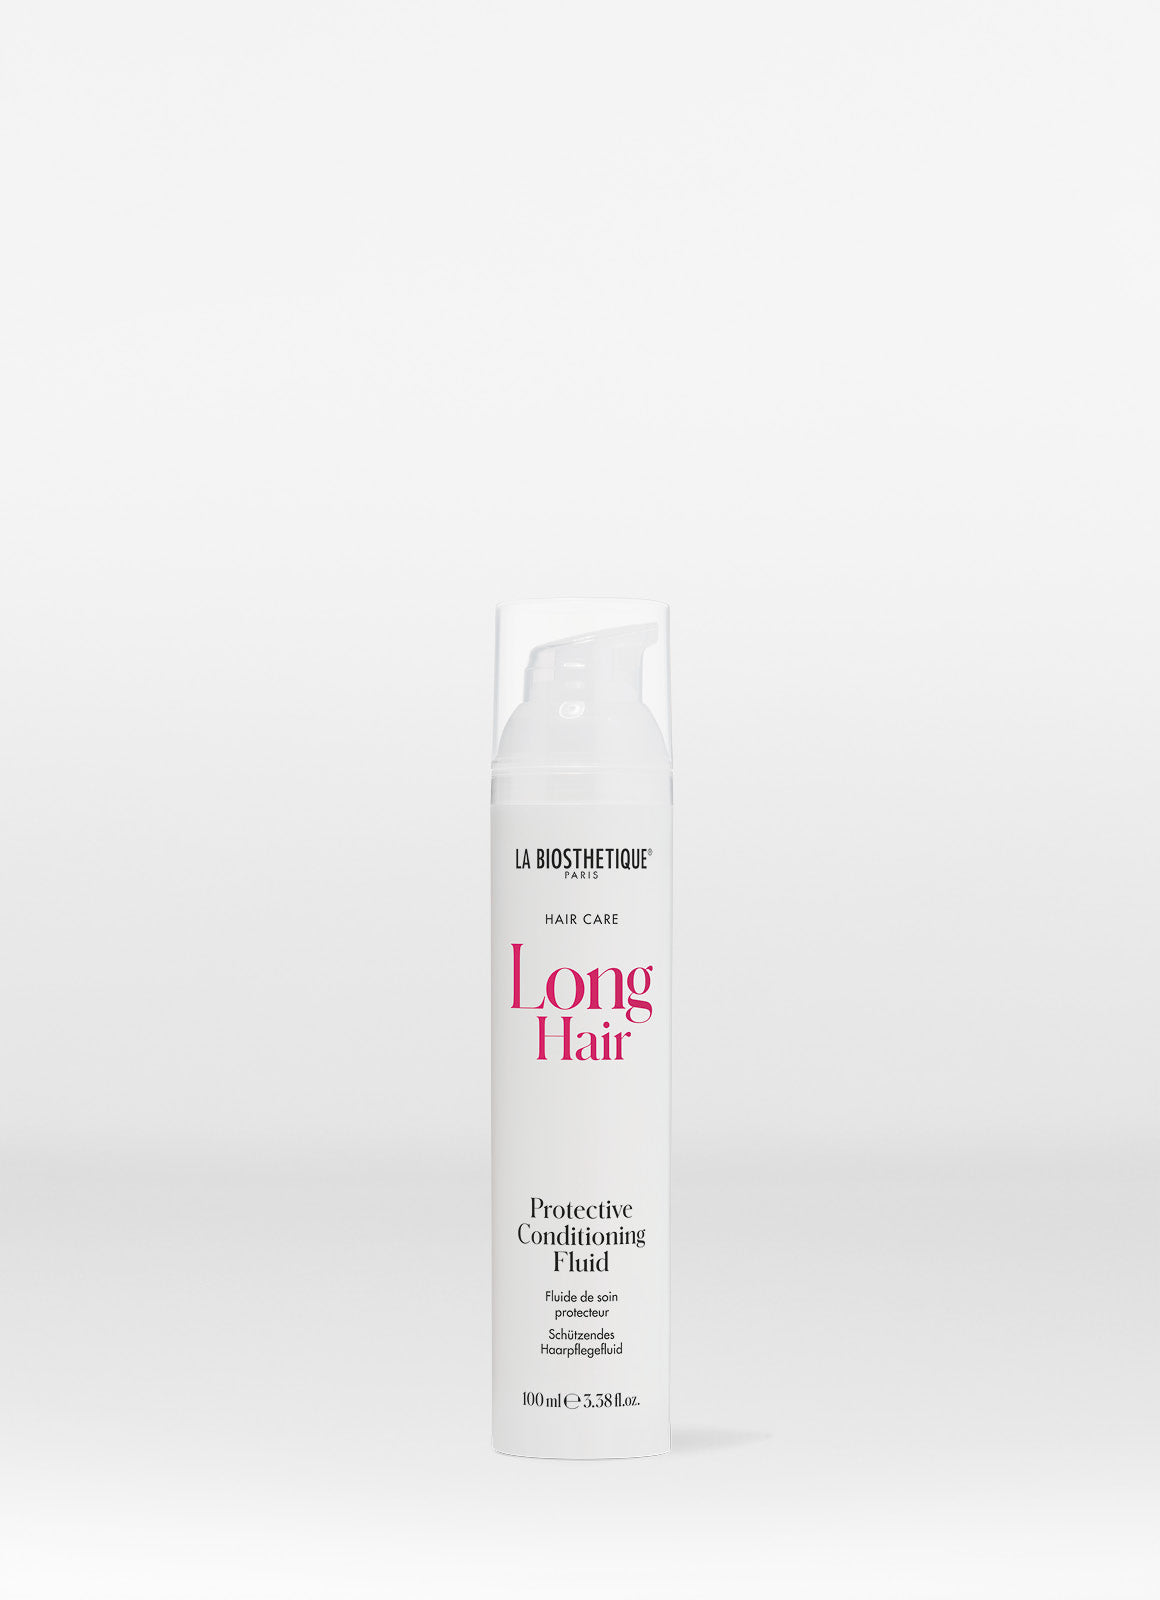 Long Hair Protective Conditioning Fluid 100ml